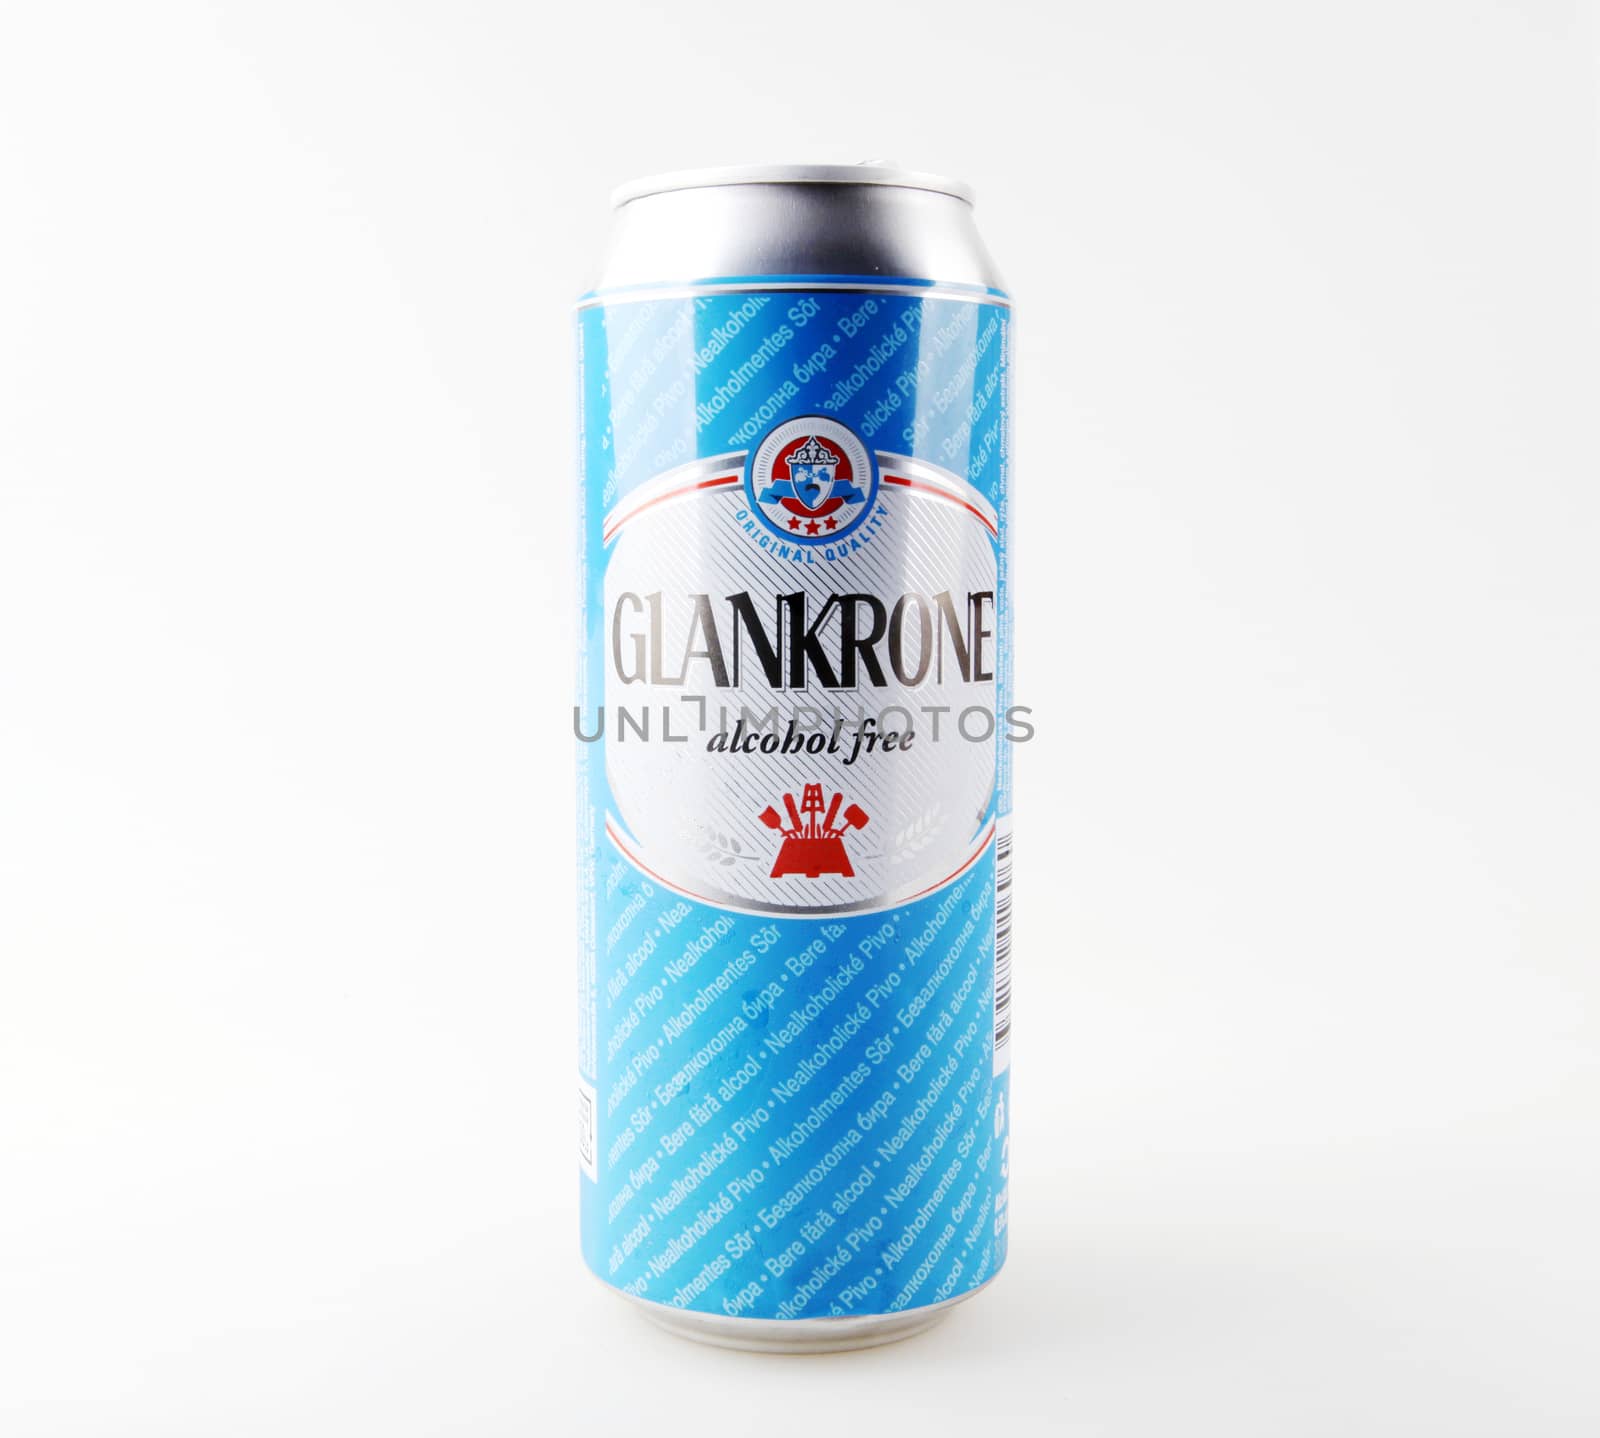 Pomorie, Bulgaria - April 25, 2019: Glankrone Alcohol Free. Pécs Brewery Is Of The Four Big Breweries In Hungary And The Biggest In The Southern Transdanubia Located In Pécs.